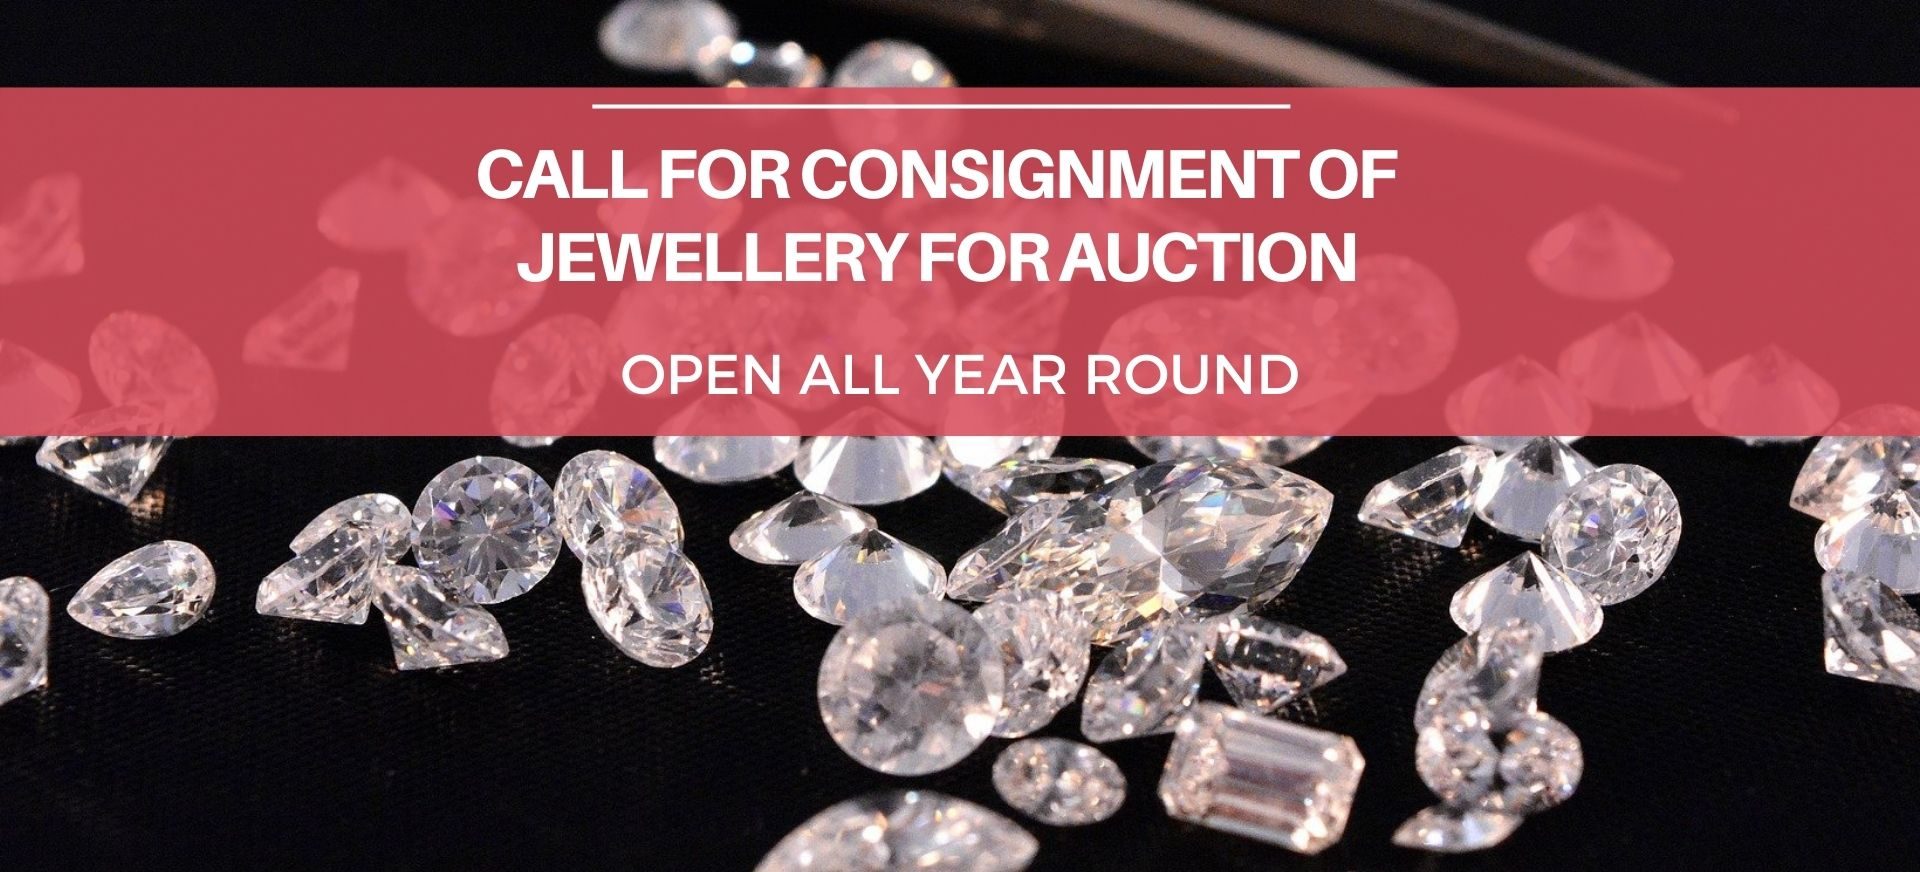 CALL FOR CONSIGNMENT OF JEWELLERY 1920px by 872px